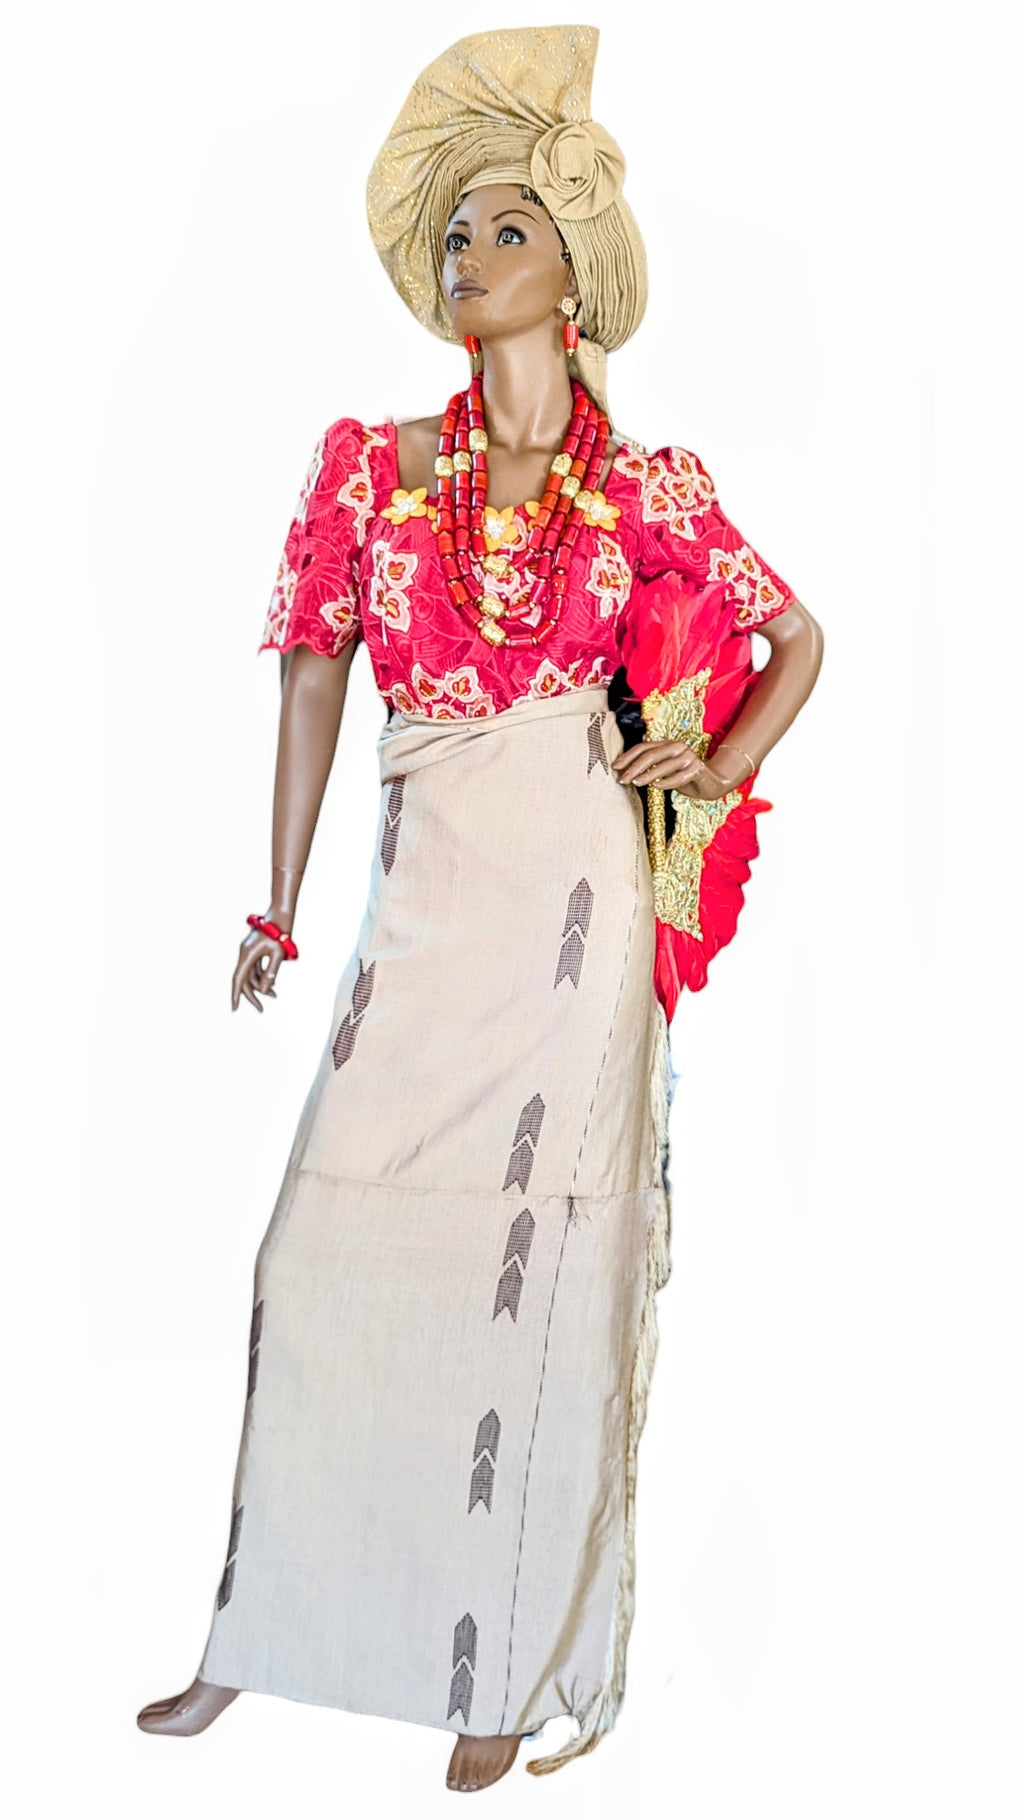 Exquisite Igbiruba Fusion: Red, Gold and Beige Lace Top with Tan and Brown Aso Oke Iro